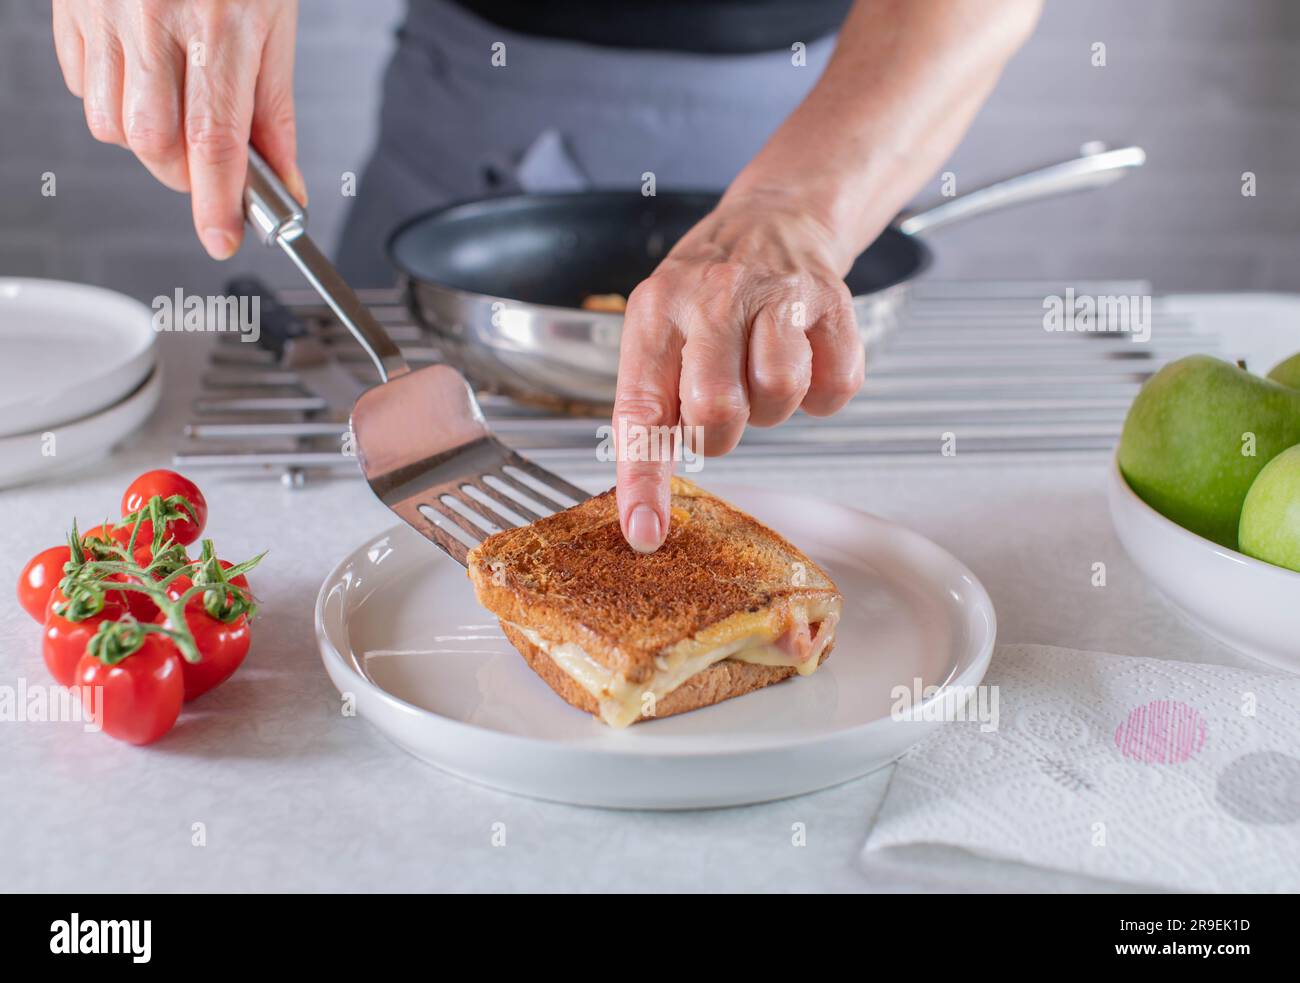 Woman with apron serving a fresh and hot ham and cheese sandwich on a plate Stock Photo